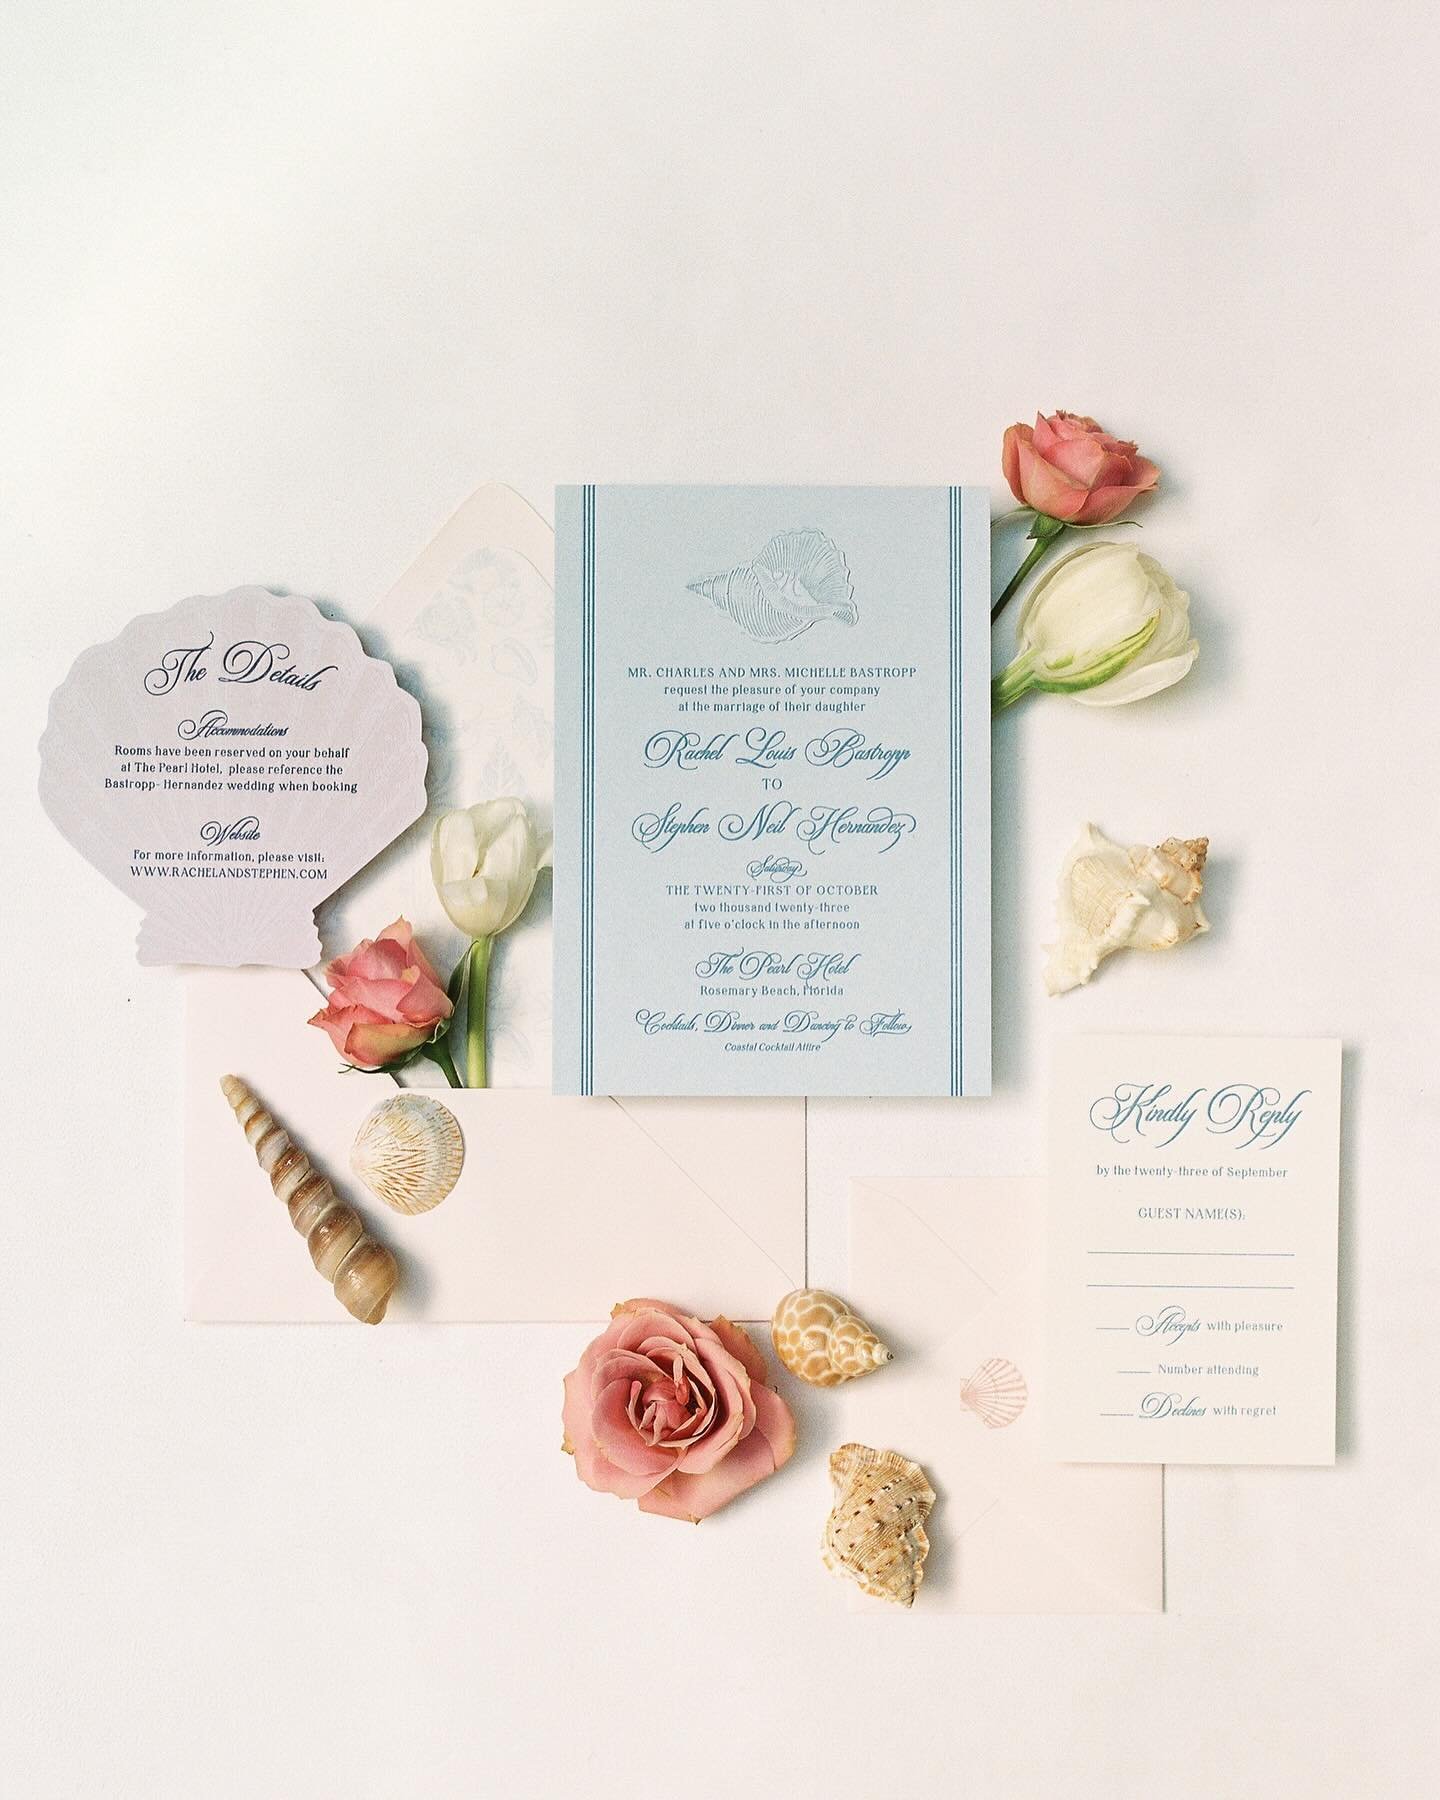 Rachel and Stephen&rsquo;s invitation suite was a seaside escape. The invitation suite featured an embossed conch shell with their initial and blue letterpress print. The details insert featured the shape of a shell in a lovely shade of lavender. The